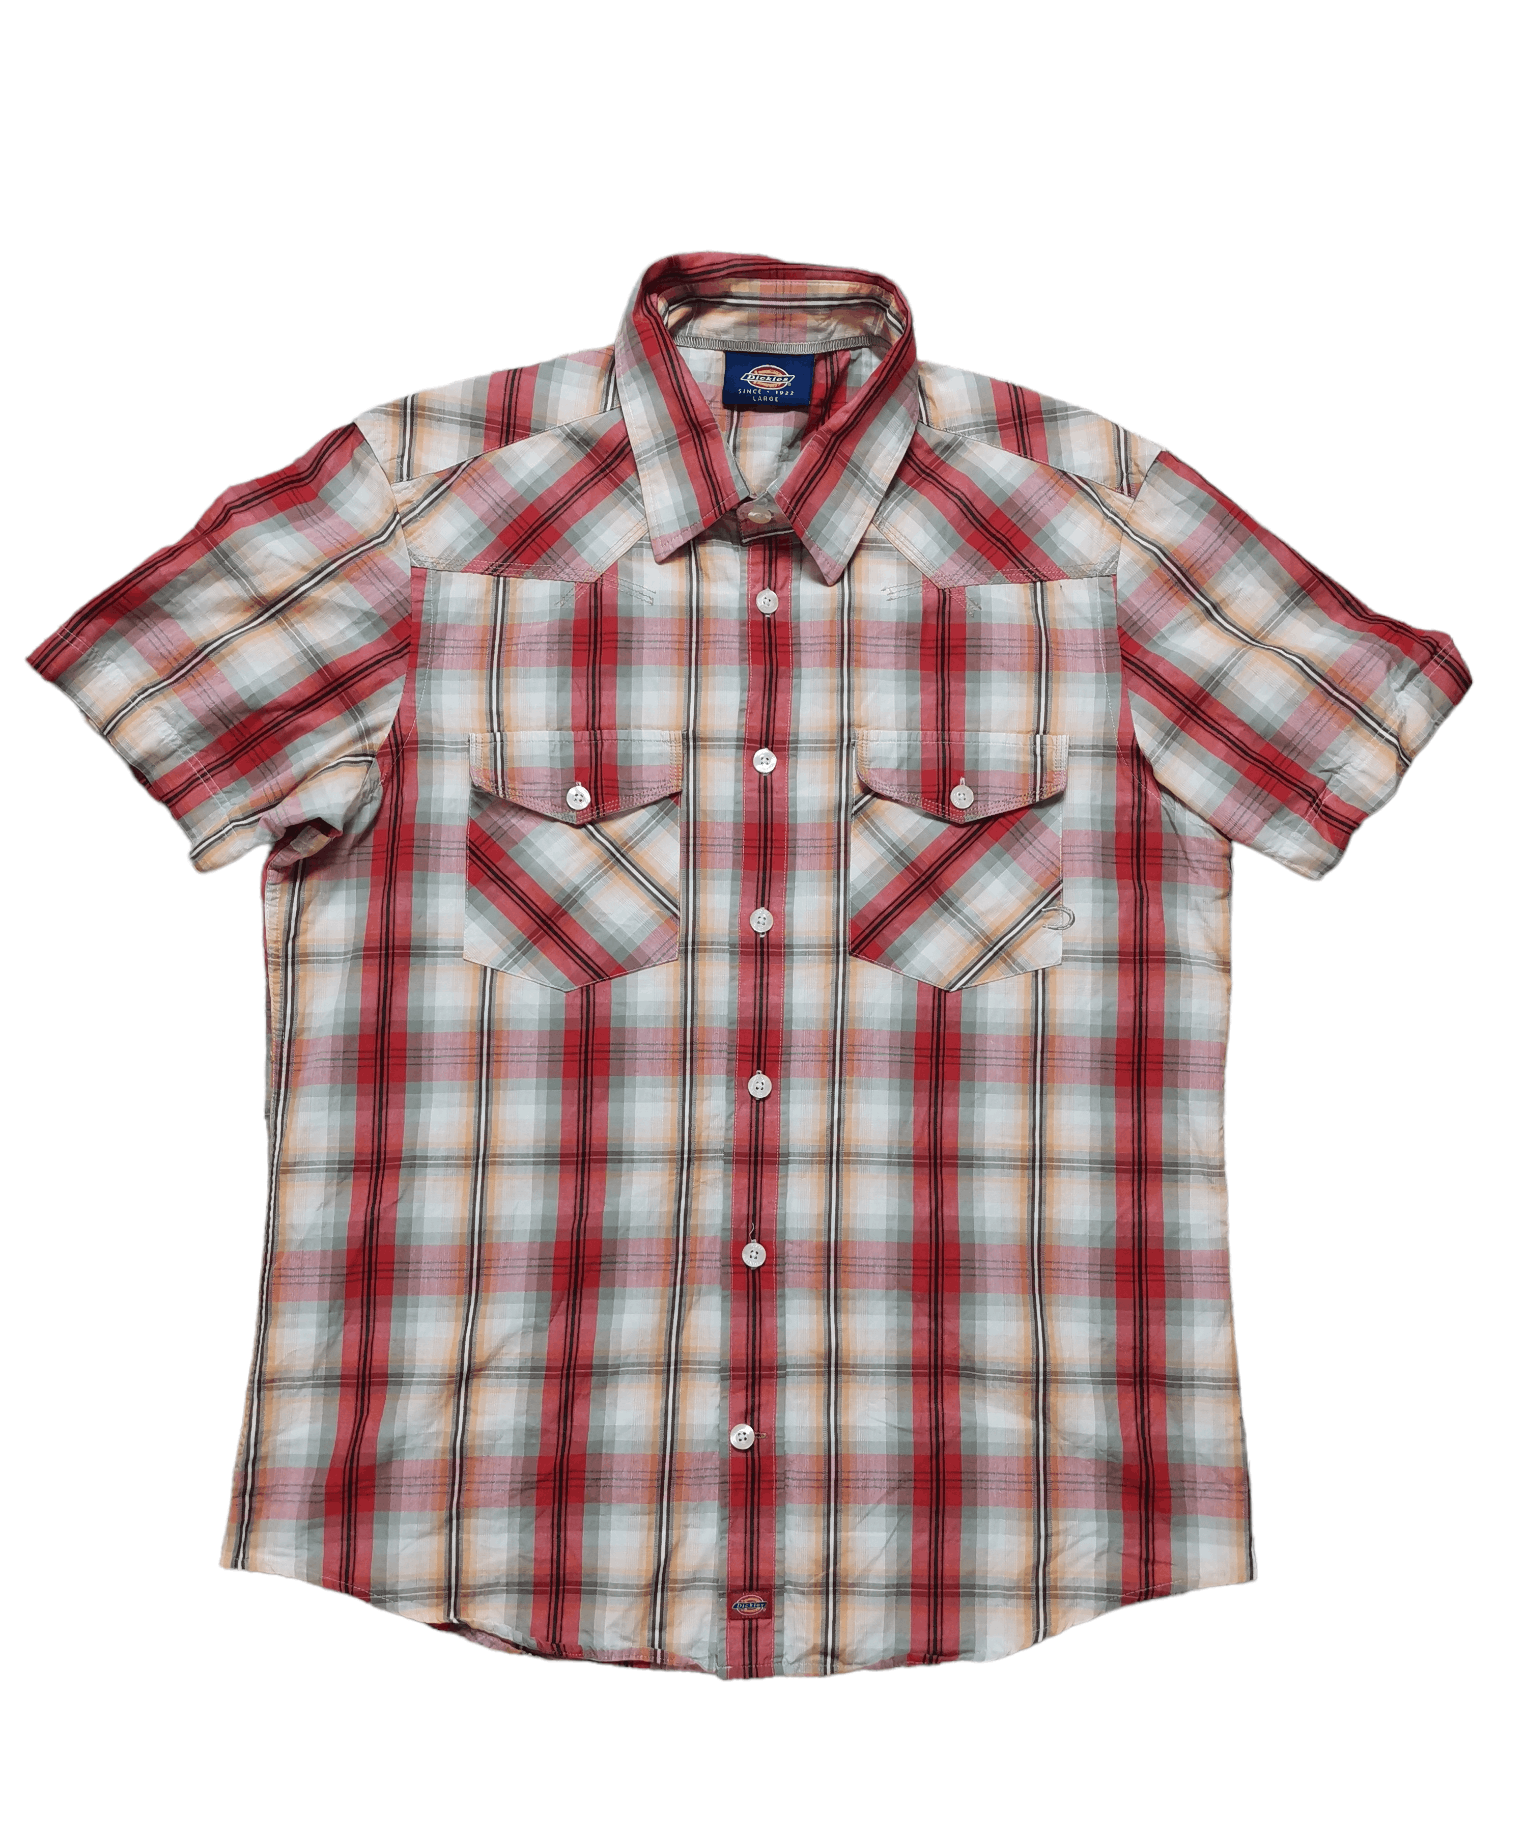 Vintage Dickies button-up shirt with short sleeves | Grailed